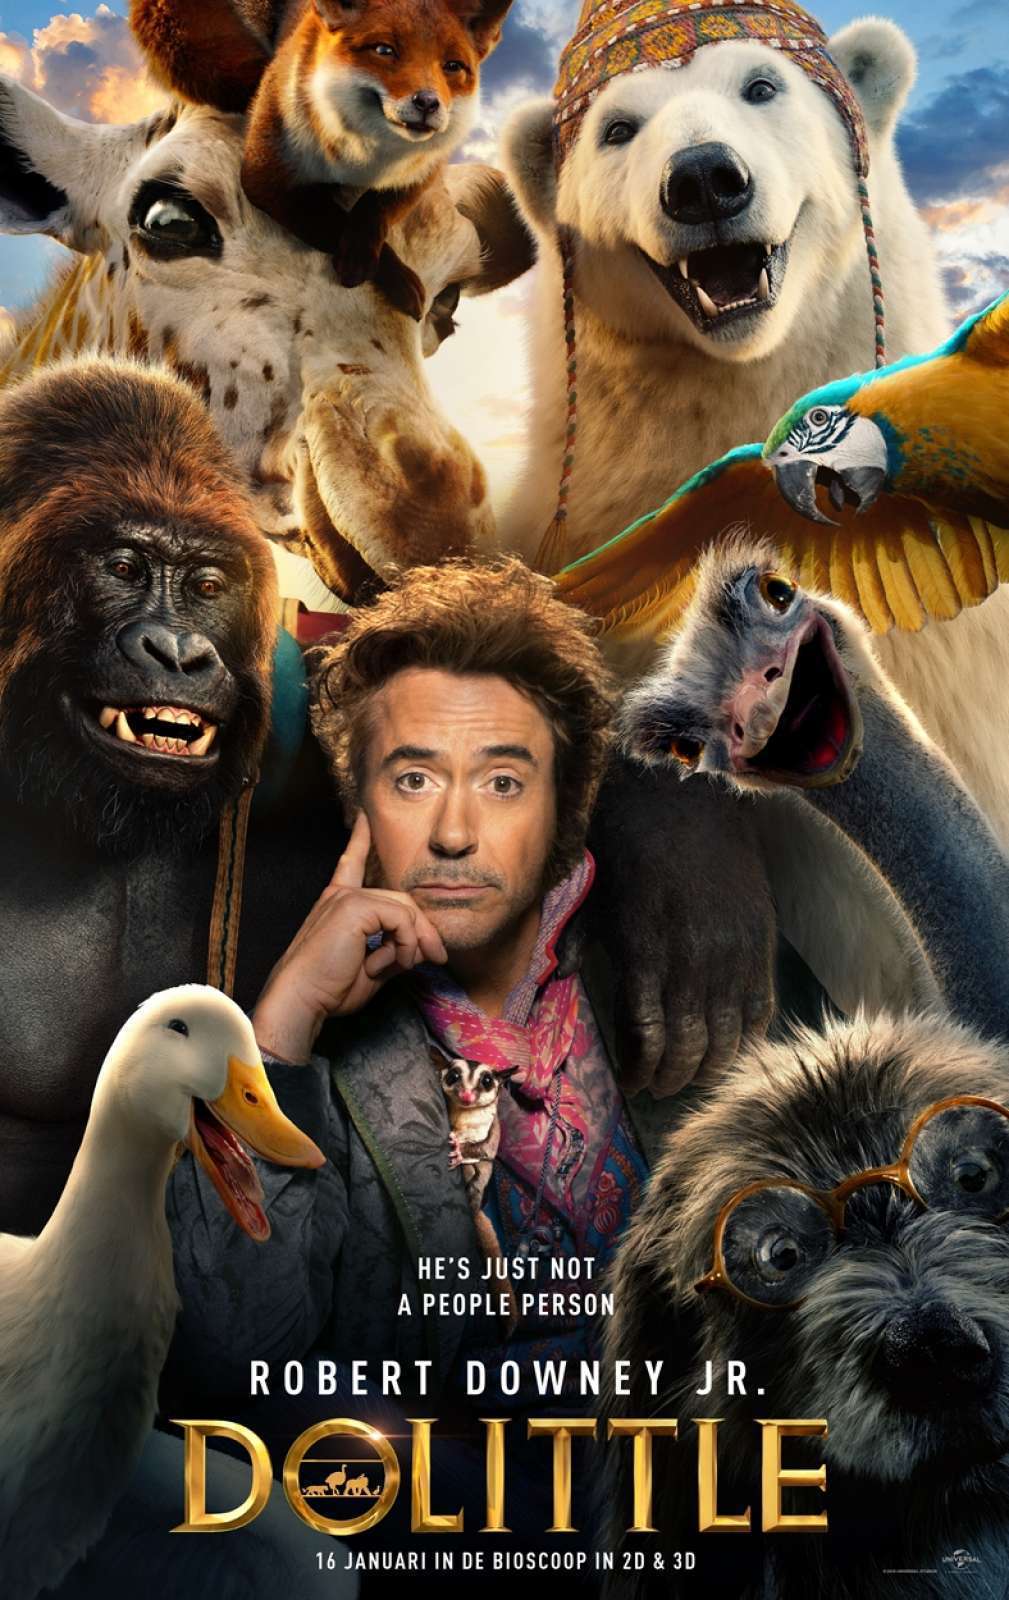 The Voyage of Doctor Dolittle Movie 2020 Free Online